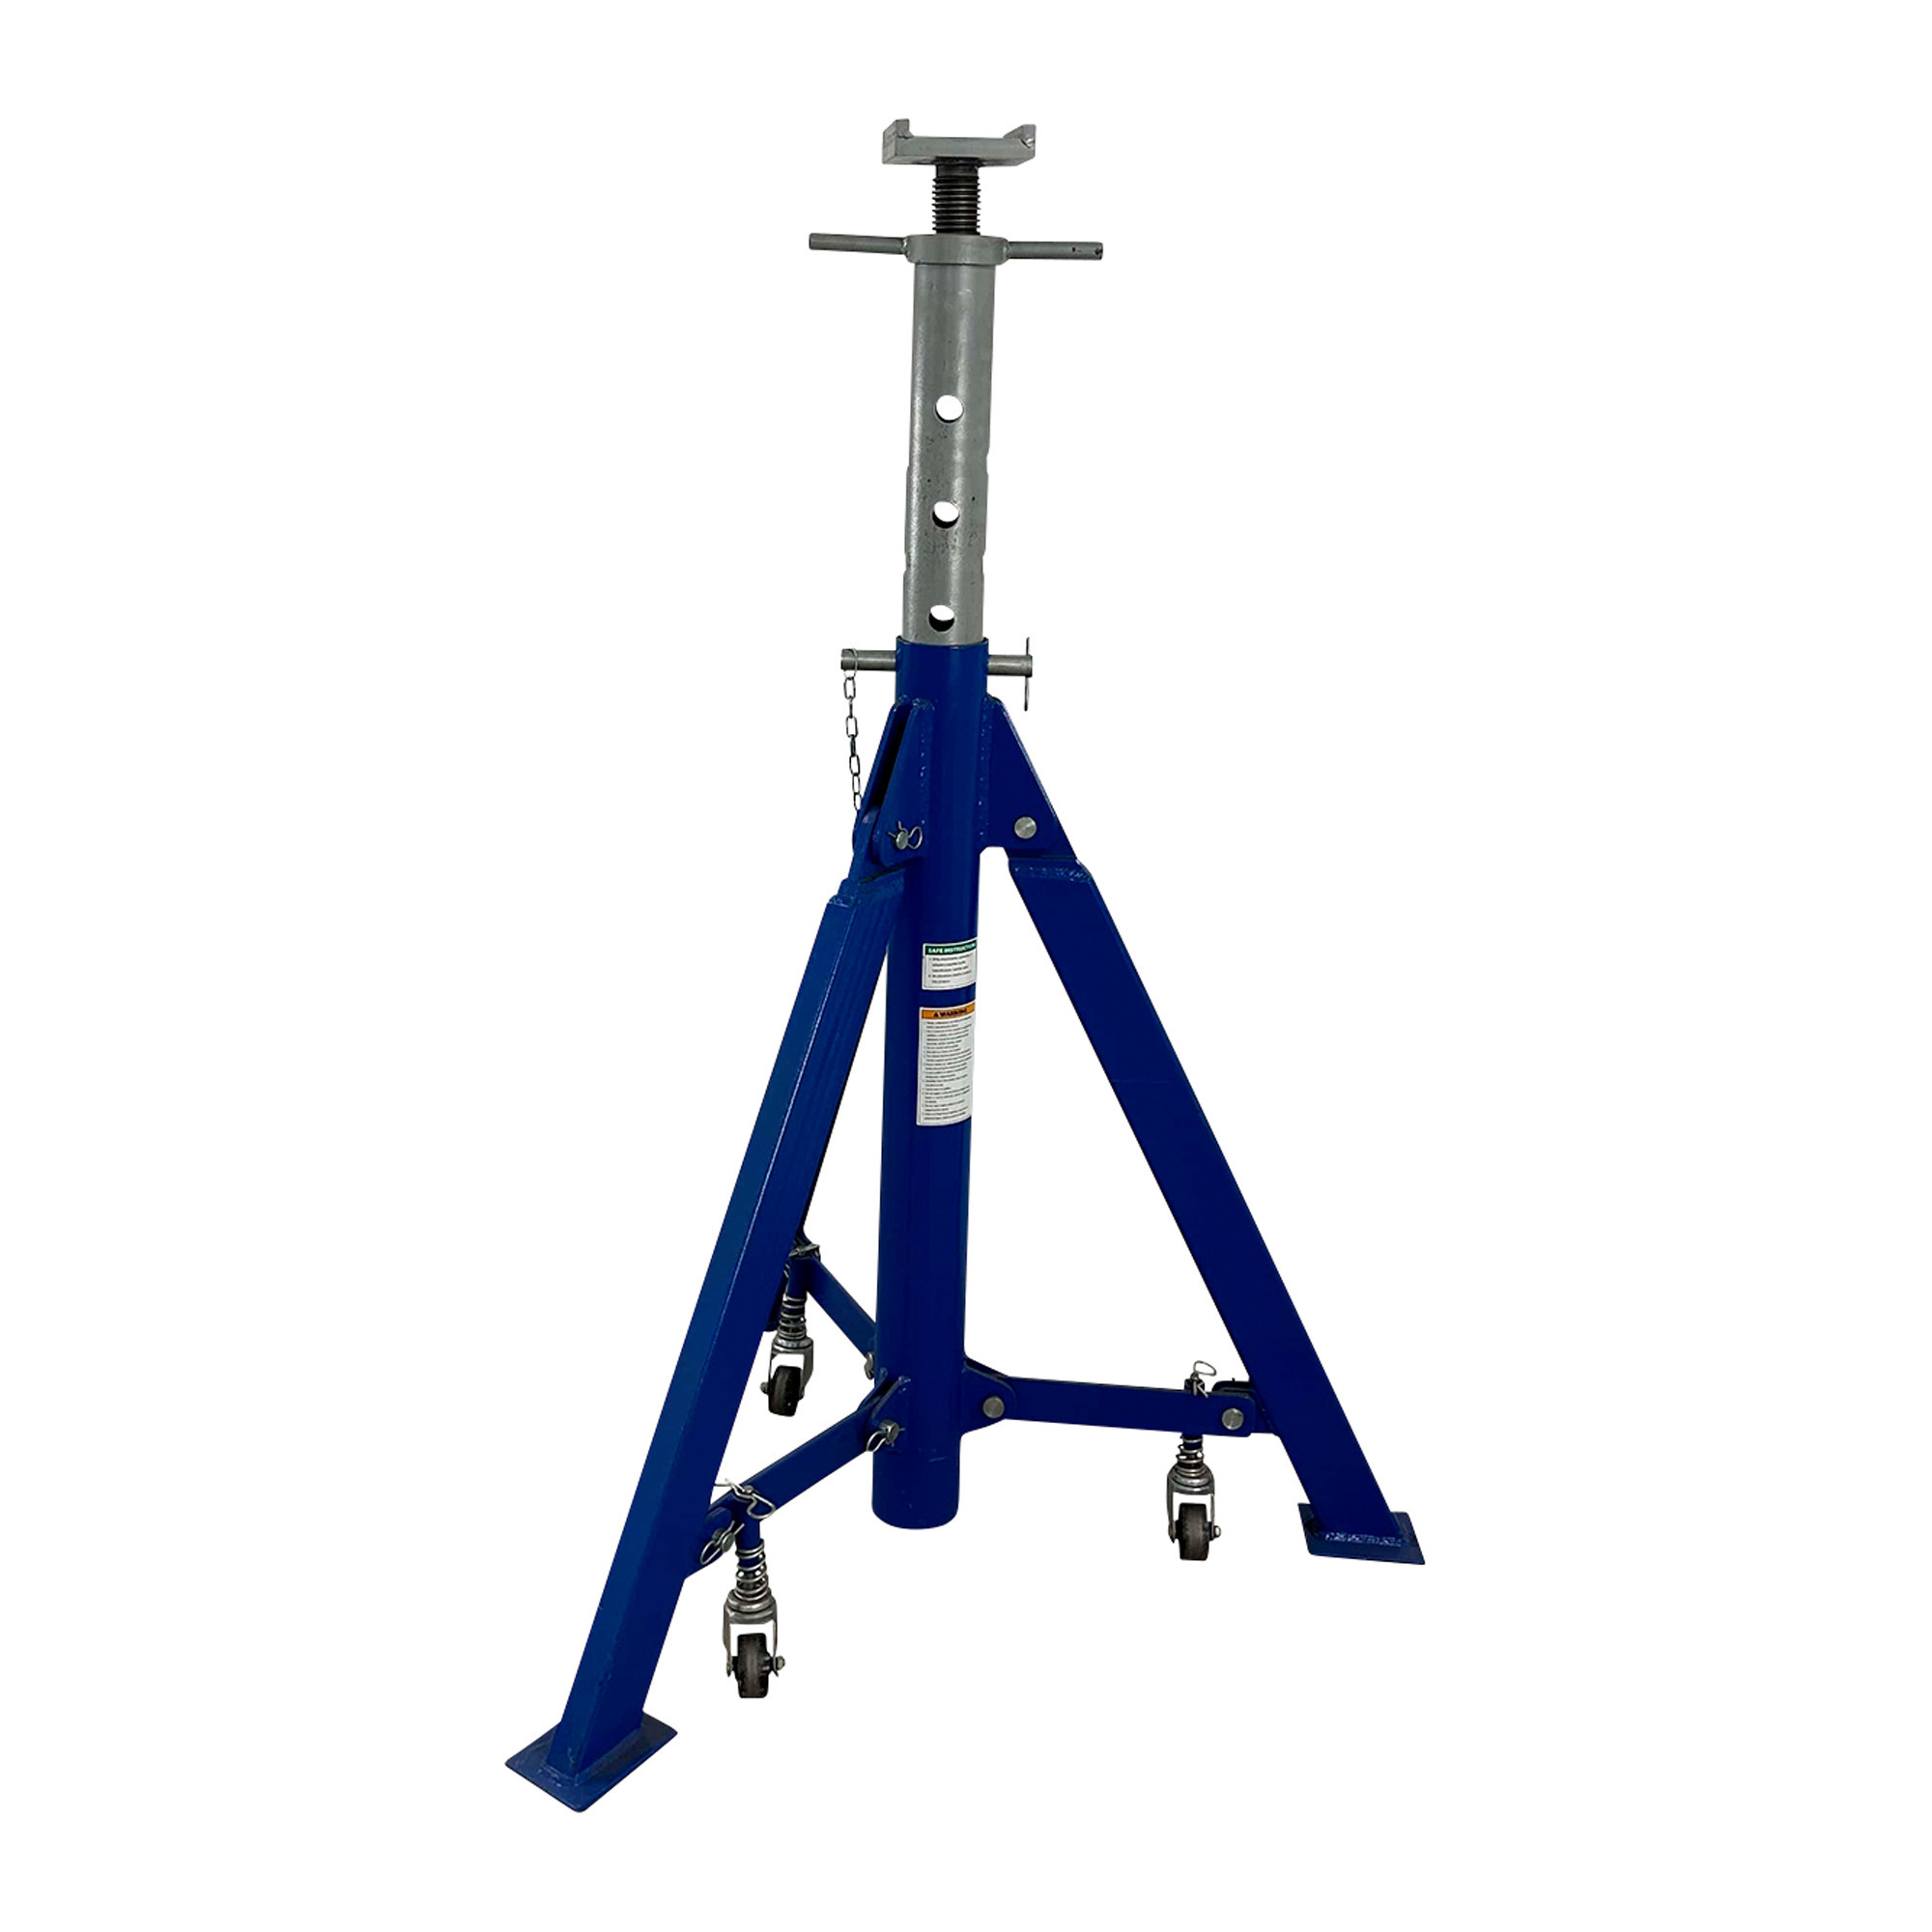 Ideal Heavy-Duty High-Rise Automotive Stand â 18,000-Lb. Capacity, Model MSC-STAND18X